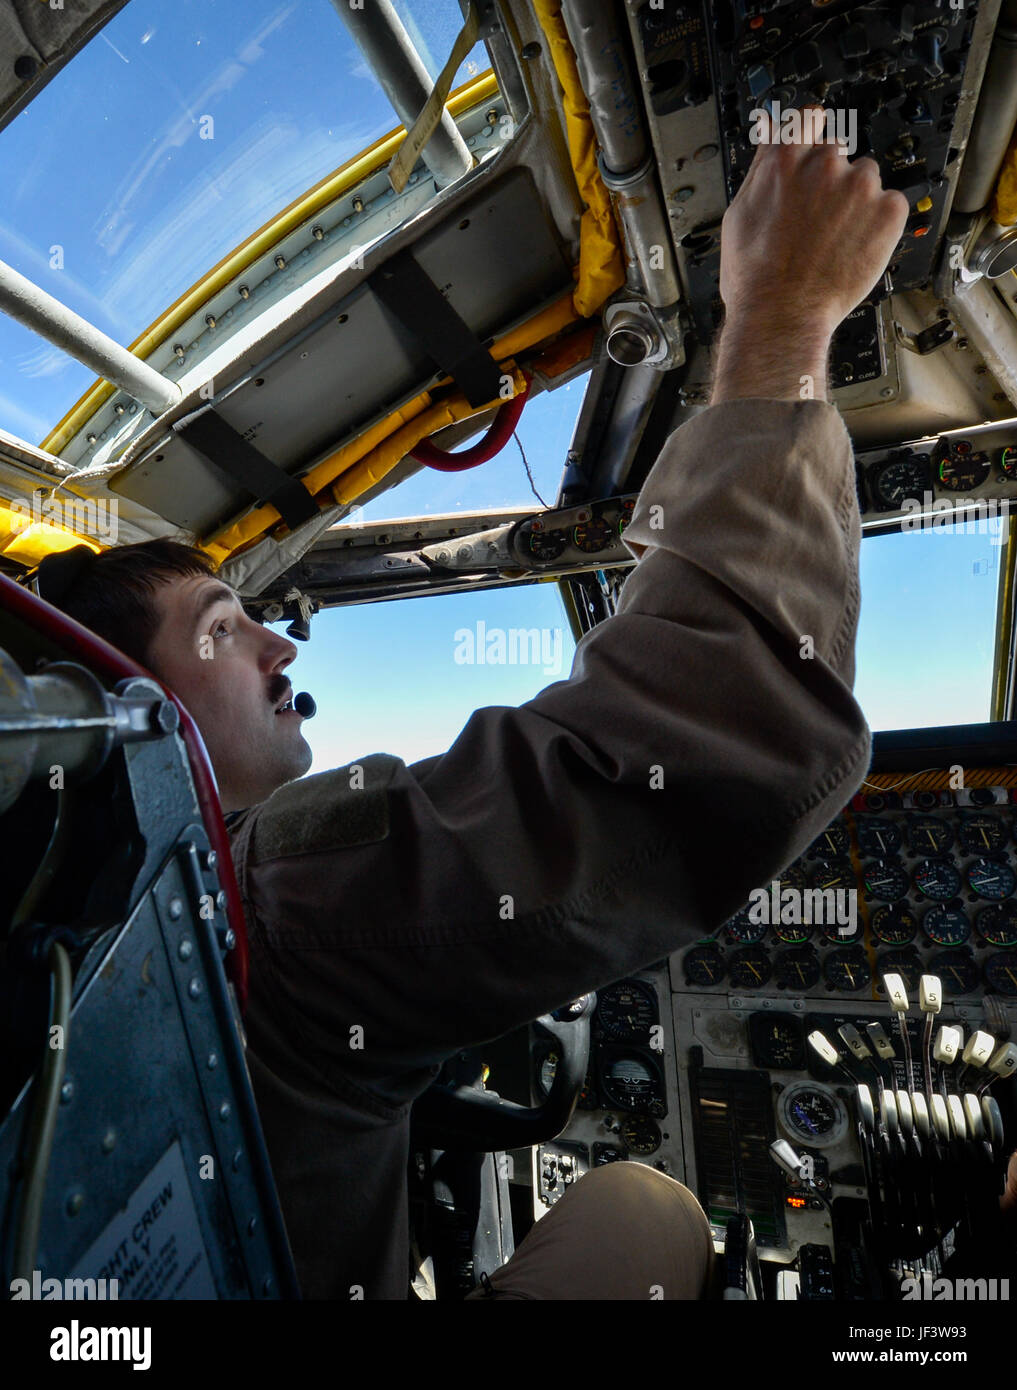 A pilot from the 23rd Expeditionary Bomb Squadron makes an aerial adjustment during a B-52 Stratofortress mission in support of Operation Inherent Resolve, May 24, 2017. Despite being in the Air Force inventory for more than 50 years, B-52s can drop precision-guided weapons. The aircraft's payload capacity of 70,000 pounds can include gravity bombs, cluster bombs, precision-guided (cruise) missiles and Joint Direct Attack Munitions. (U.S. Air Force photo by Staff Sgt. Michael Battles) Stock Photo